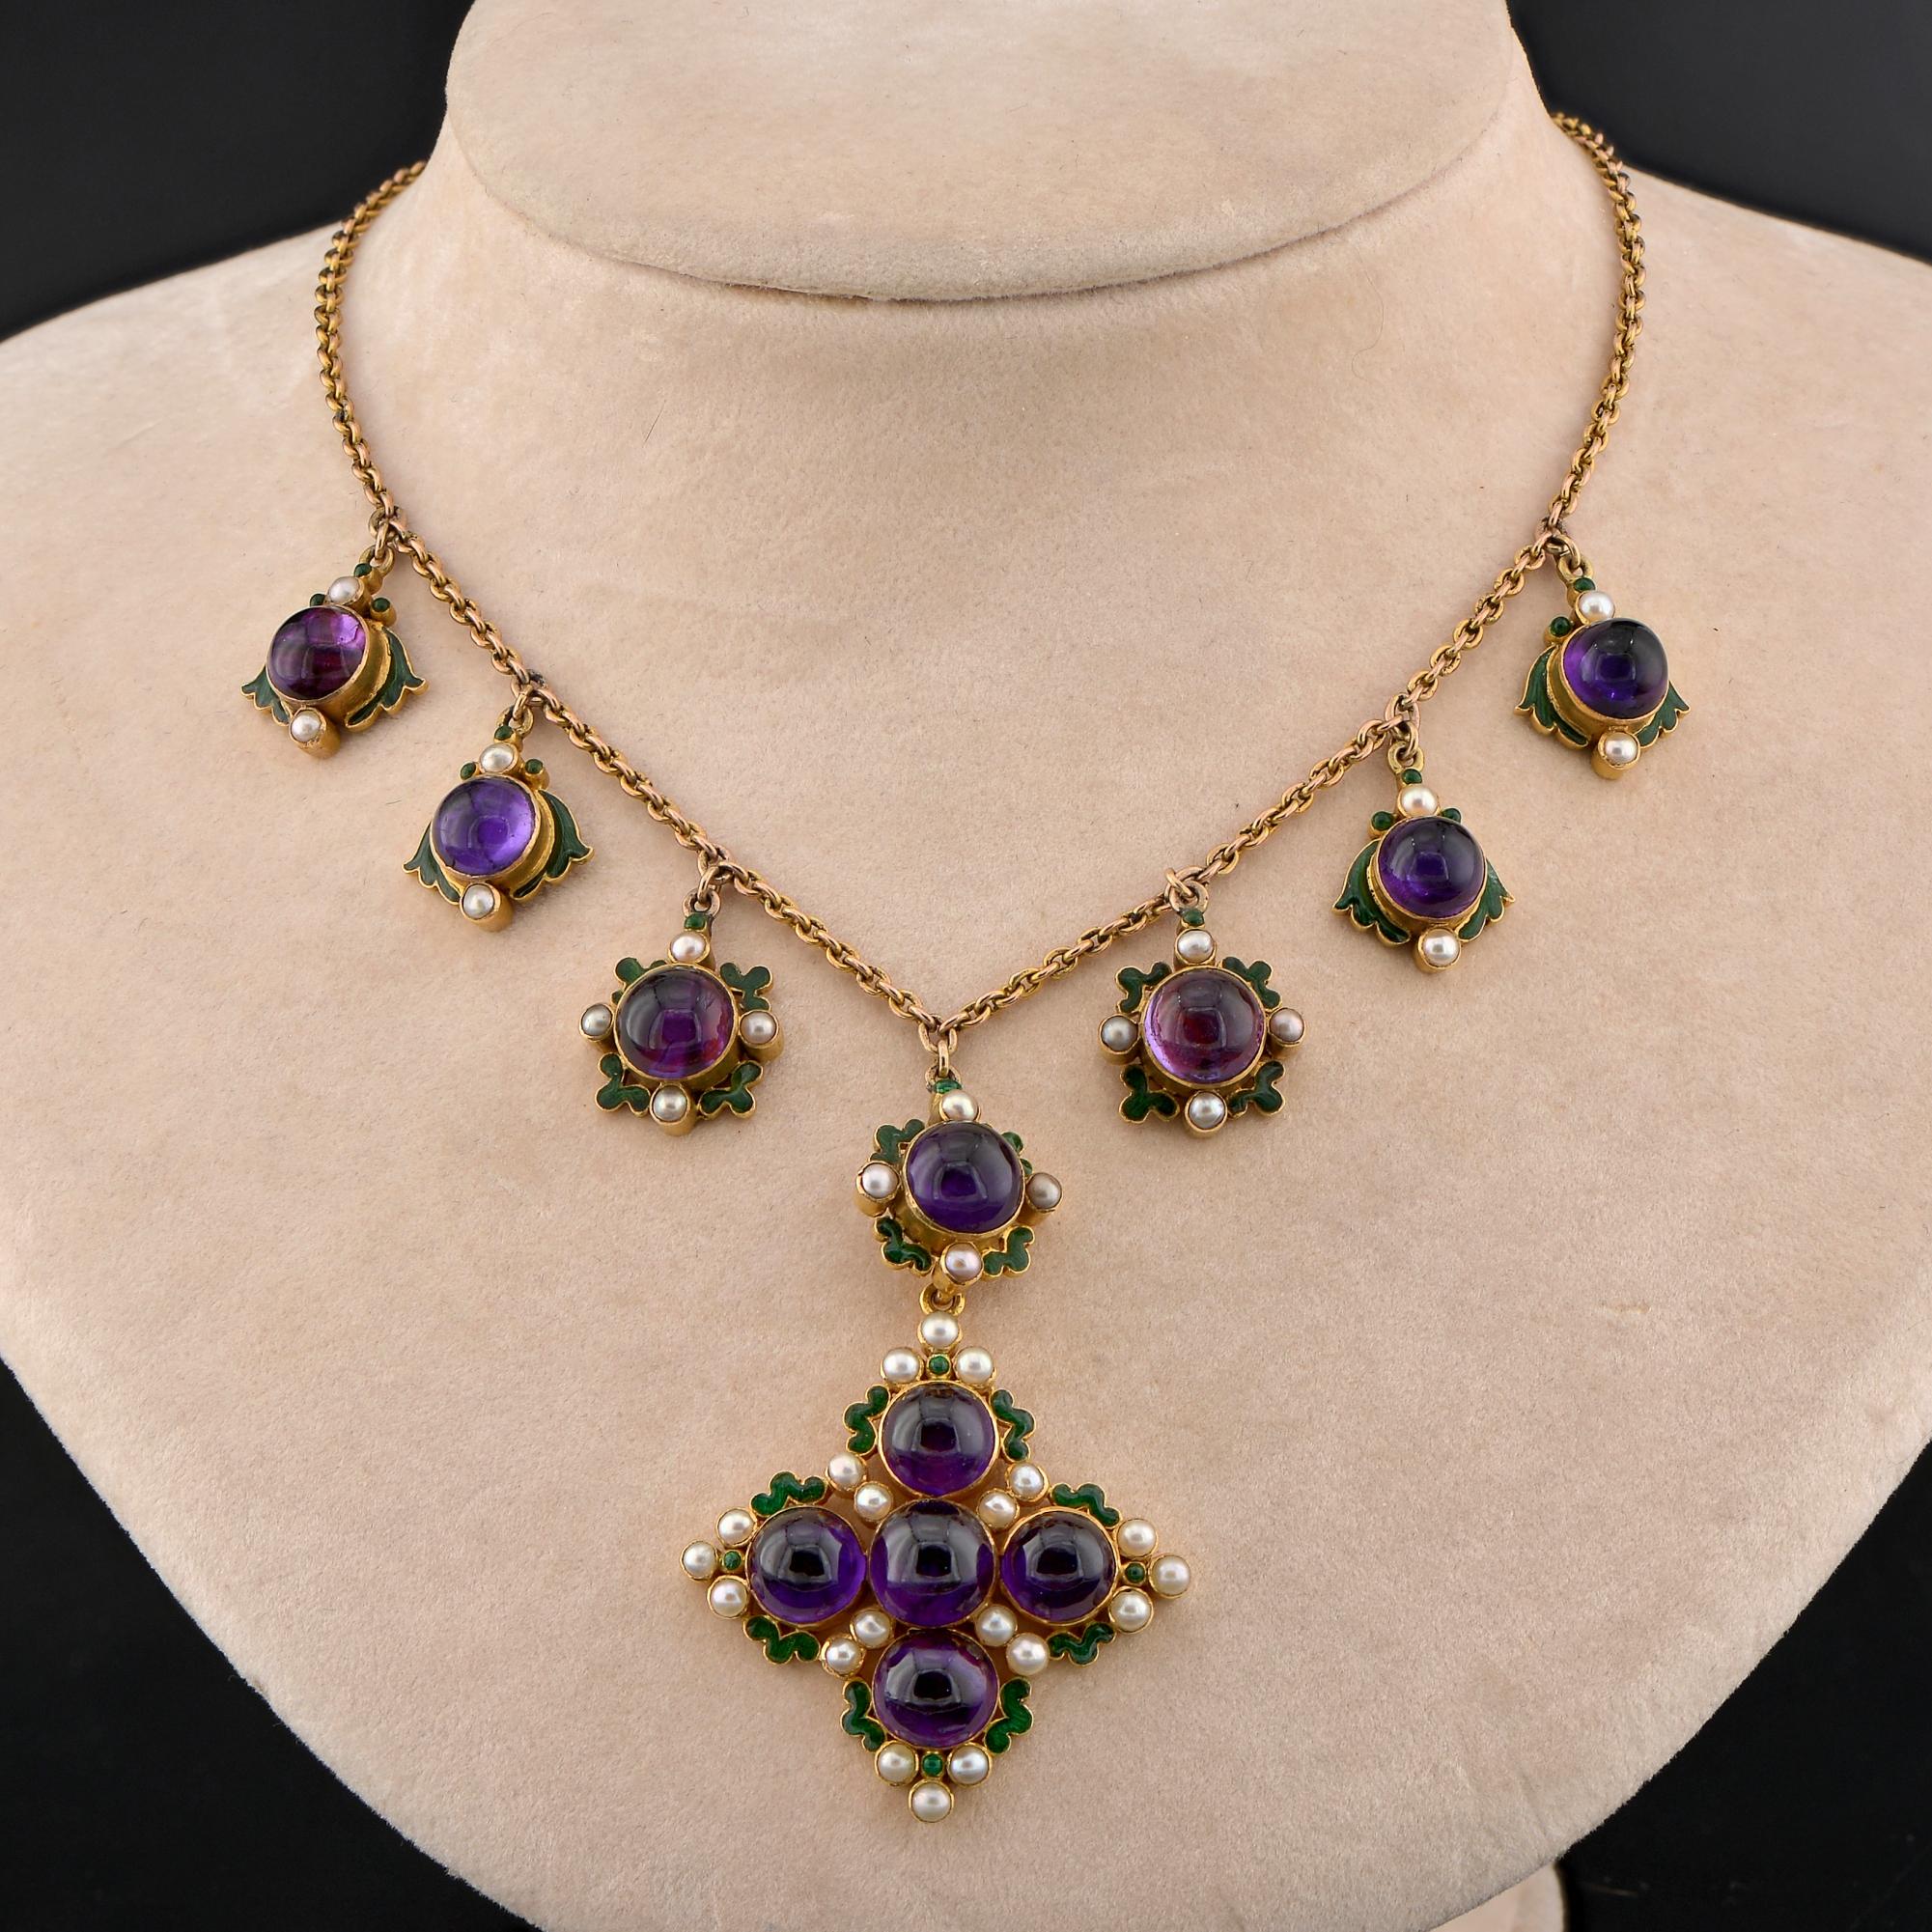 Striking Antique Necklace
A particularly pretty antique necklace from the 19th century that is very wearable for many occasions,day night, with a detachable pendant for drama and impact
Hand made in solid 18 Kt gold, comprising a trace chain